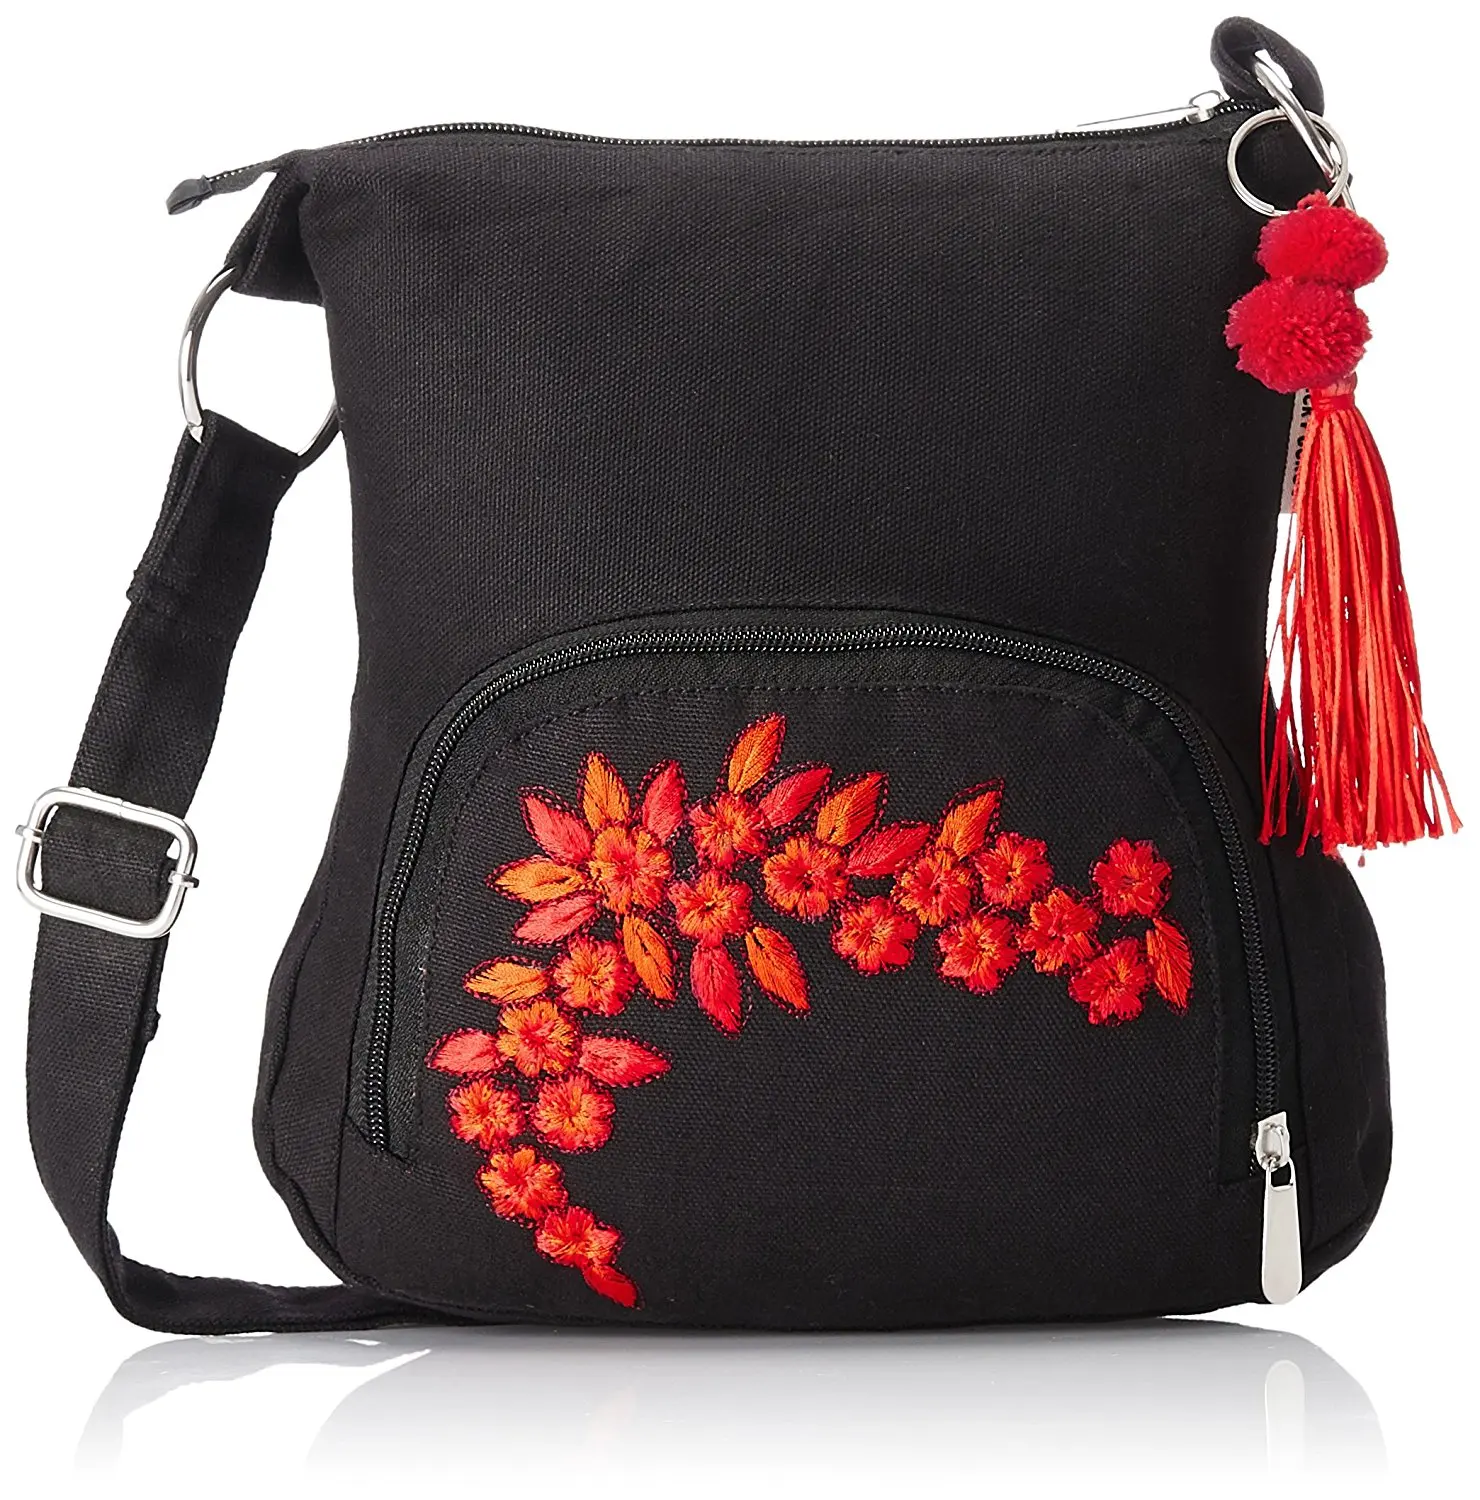 cloth sling bags online shopping